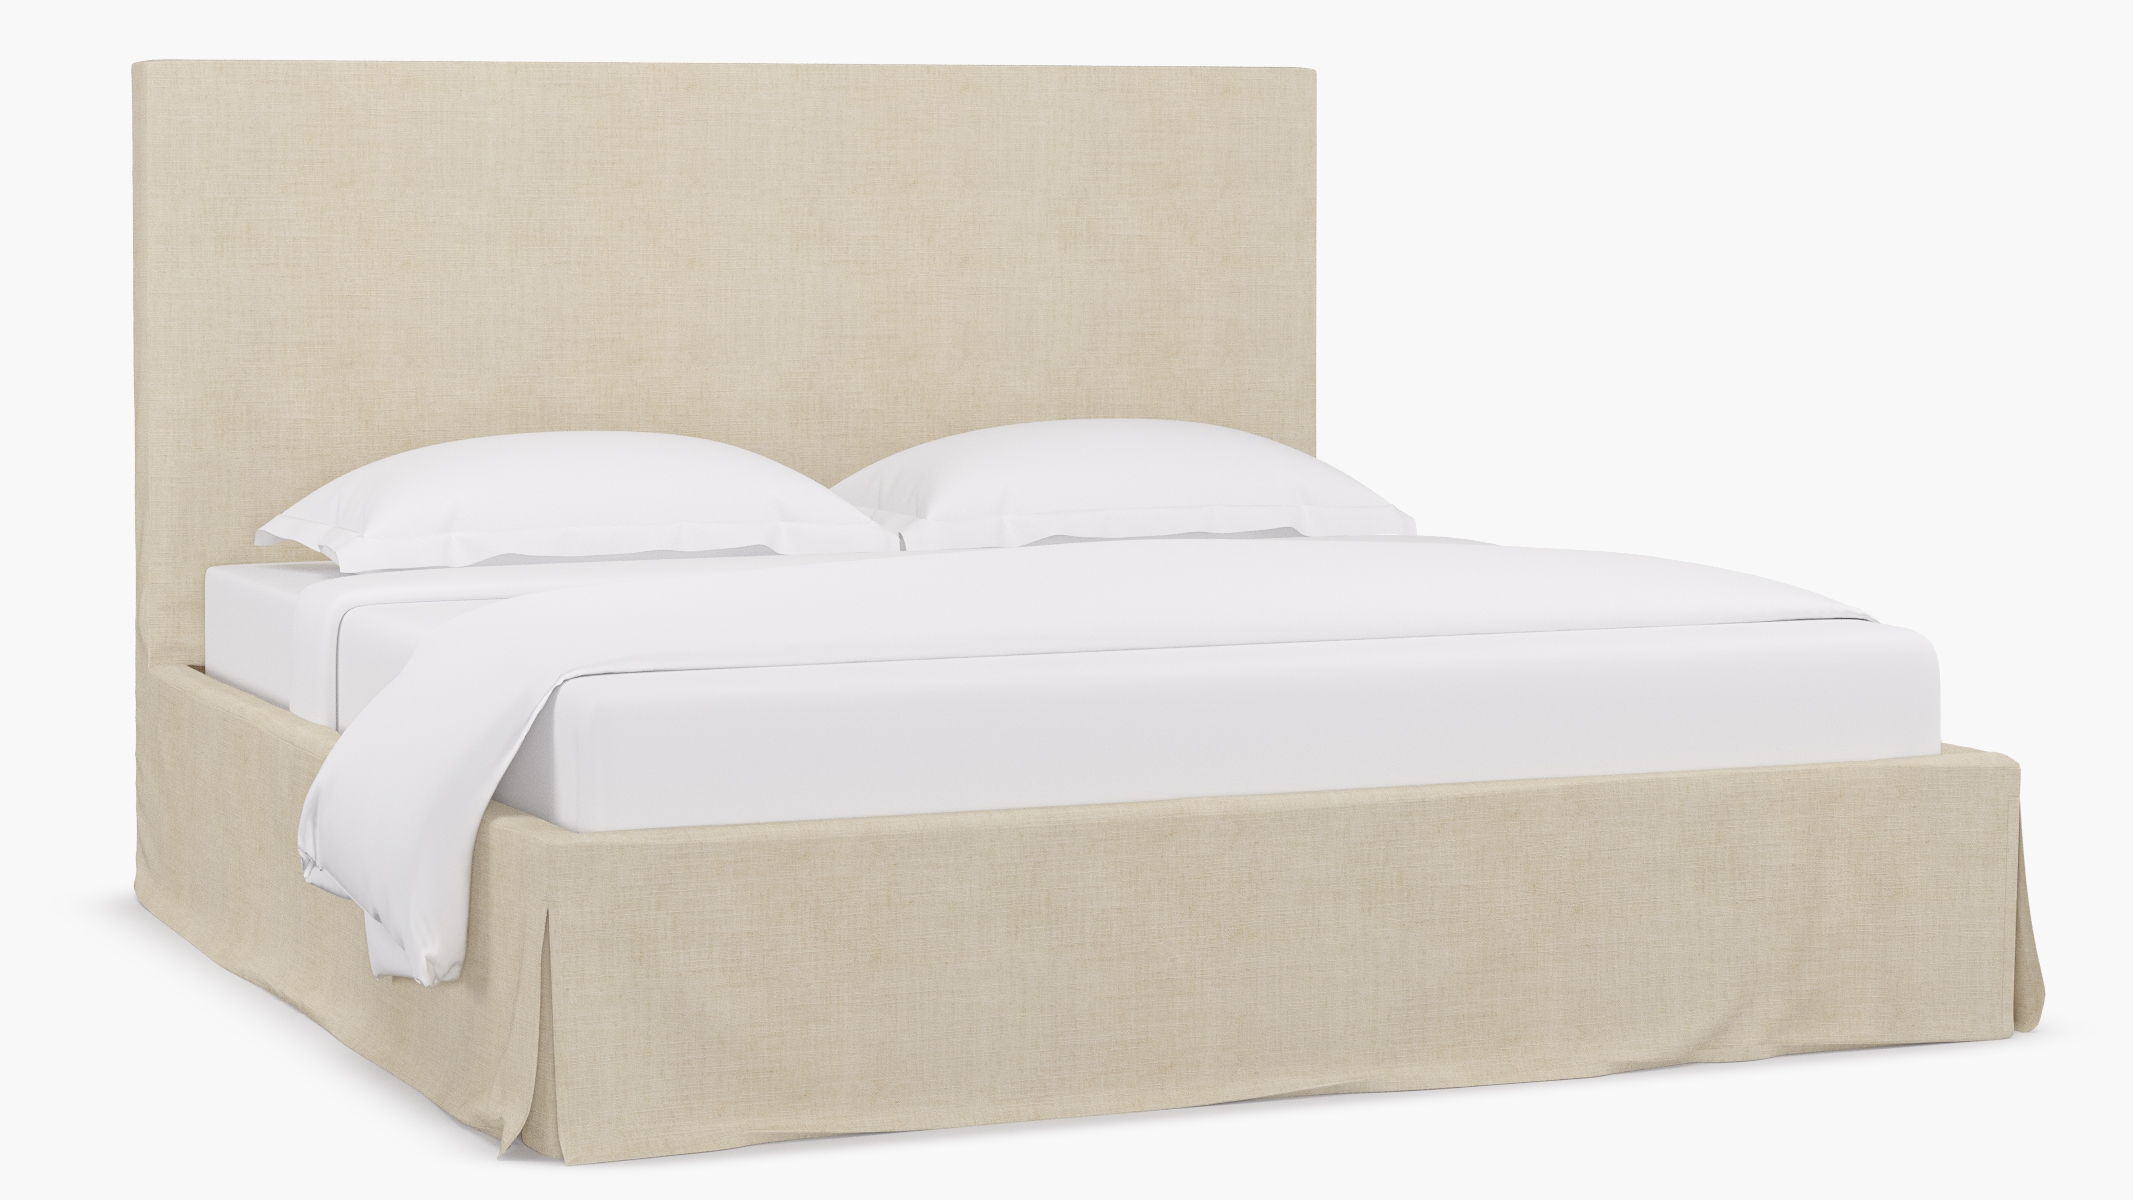 Slipcovered Bed, Talc Everyday Linen, King - Image 1